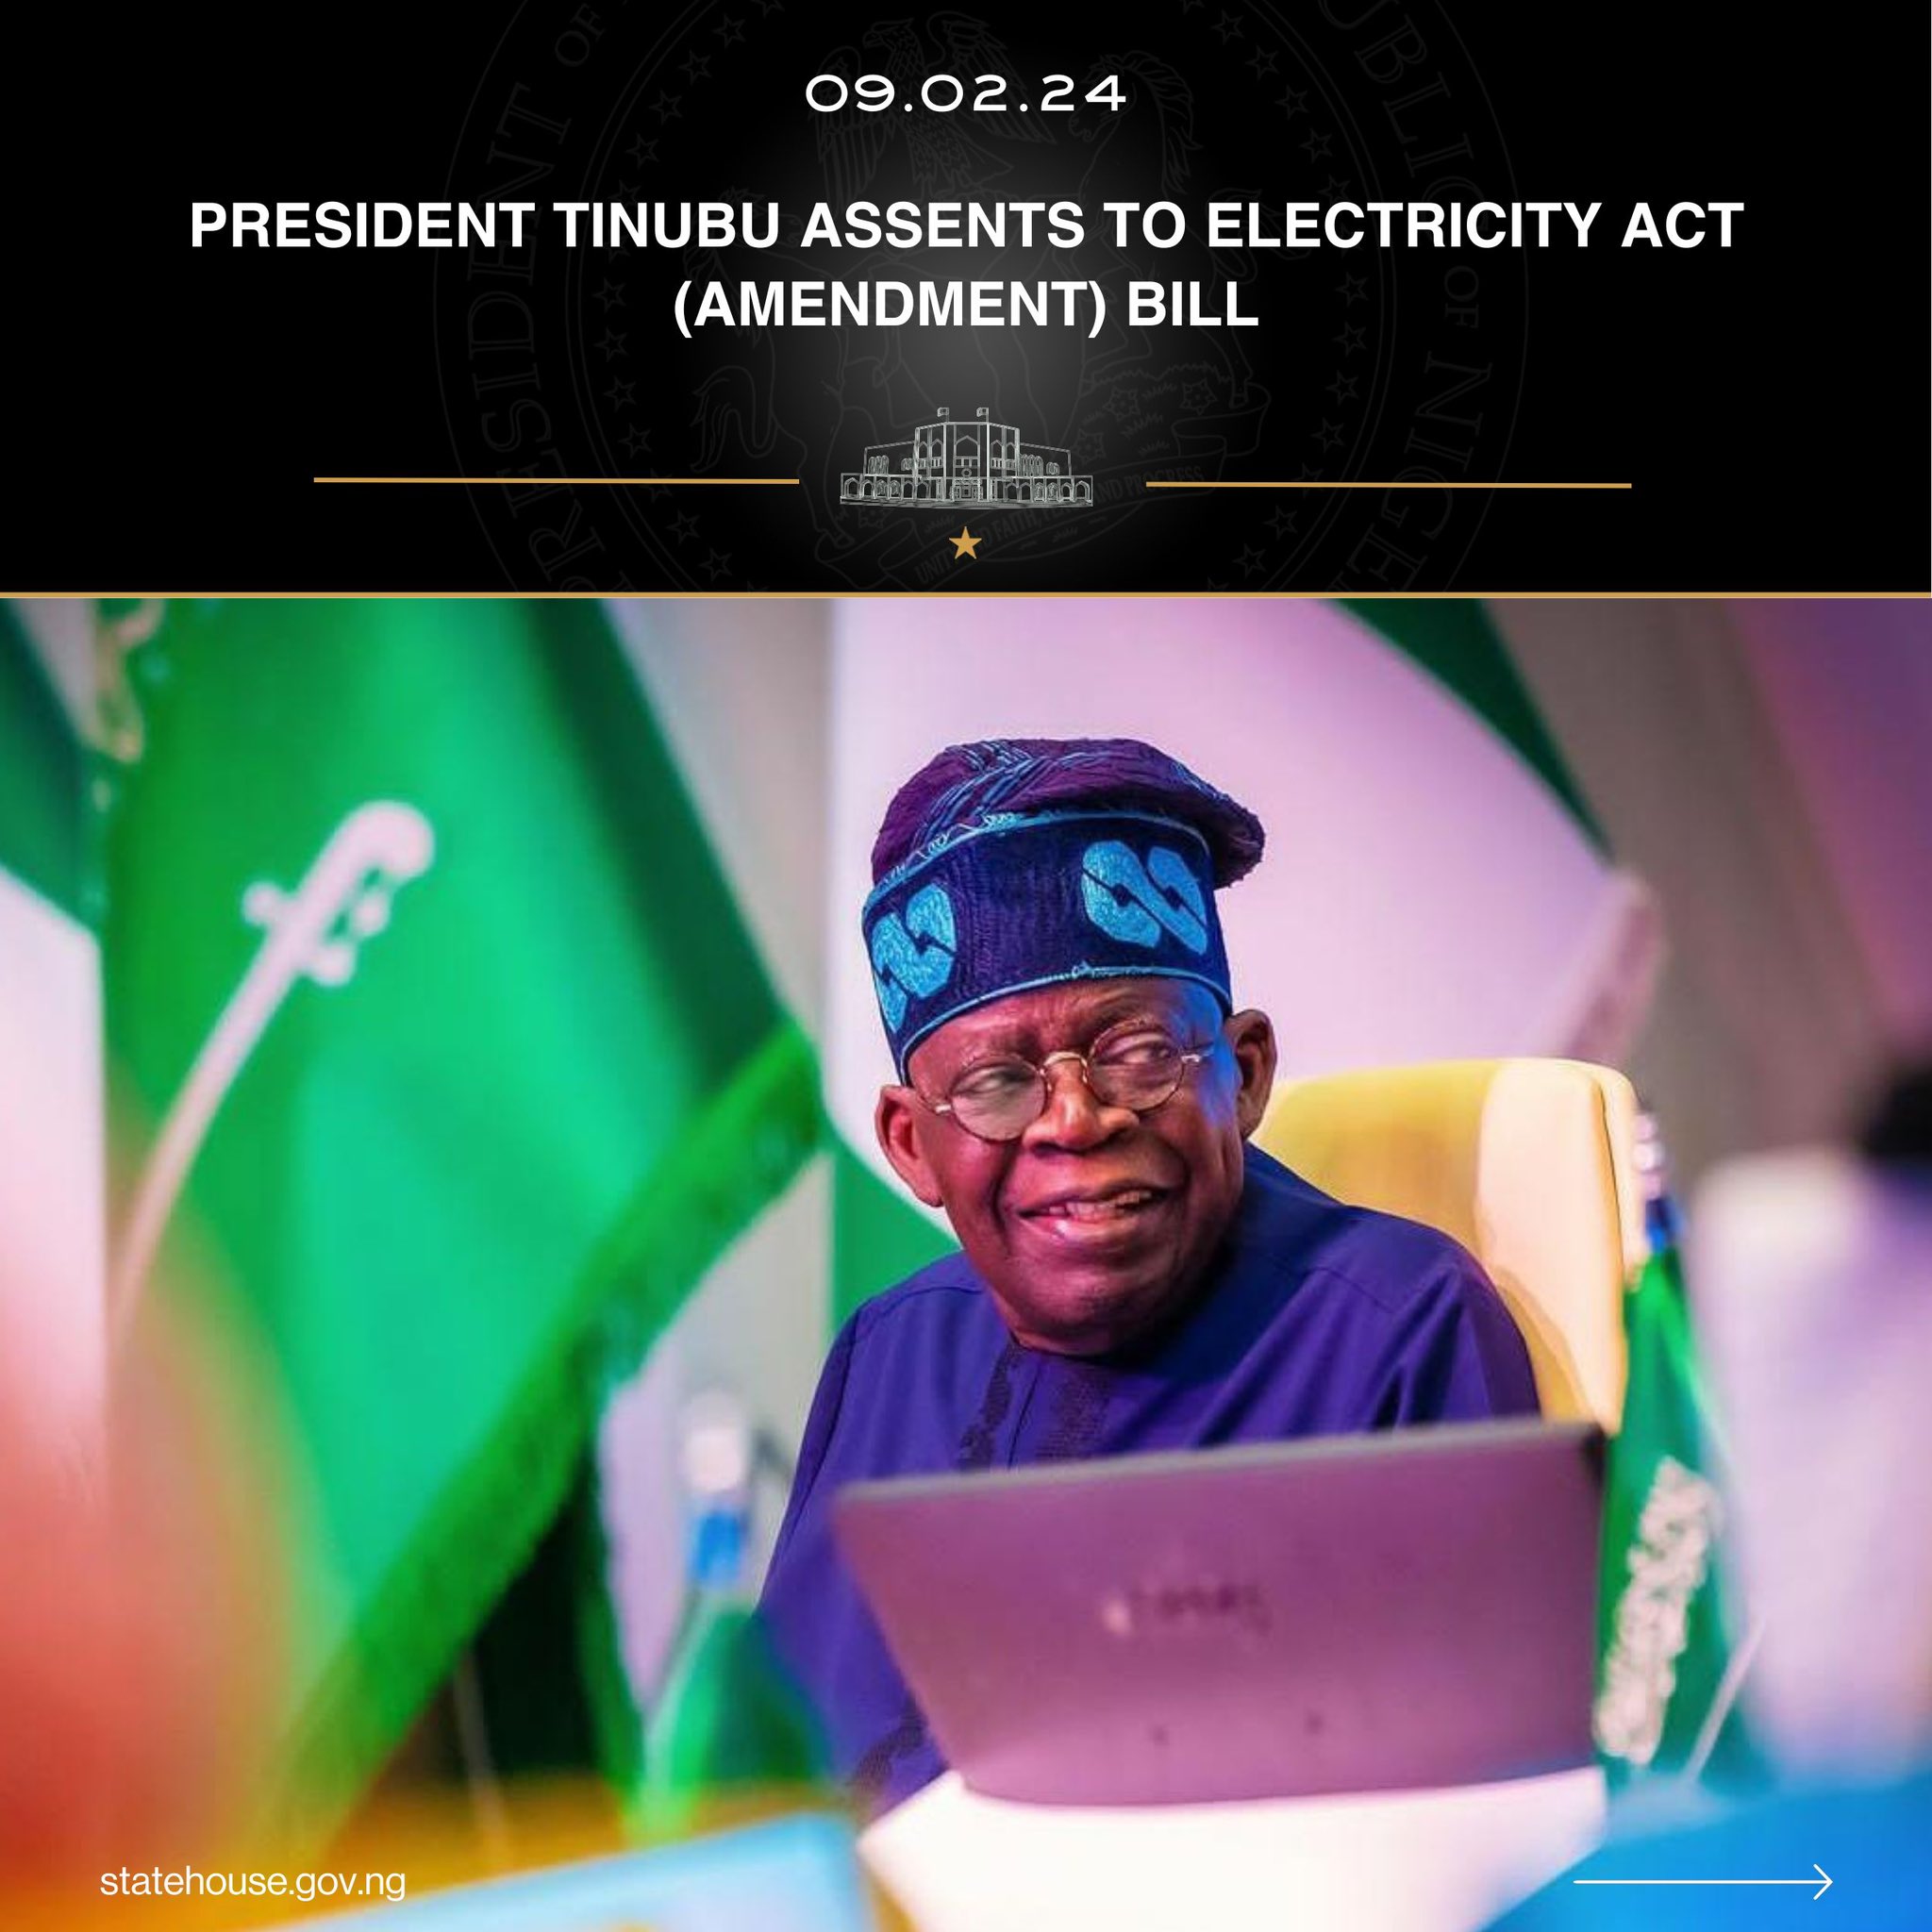 Electricity Act
